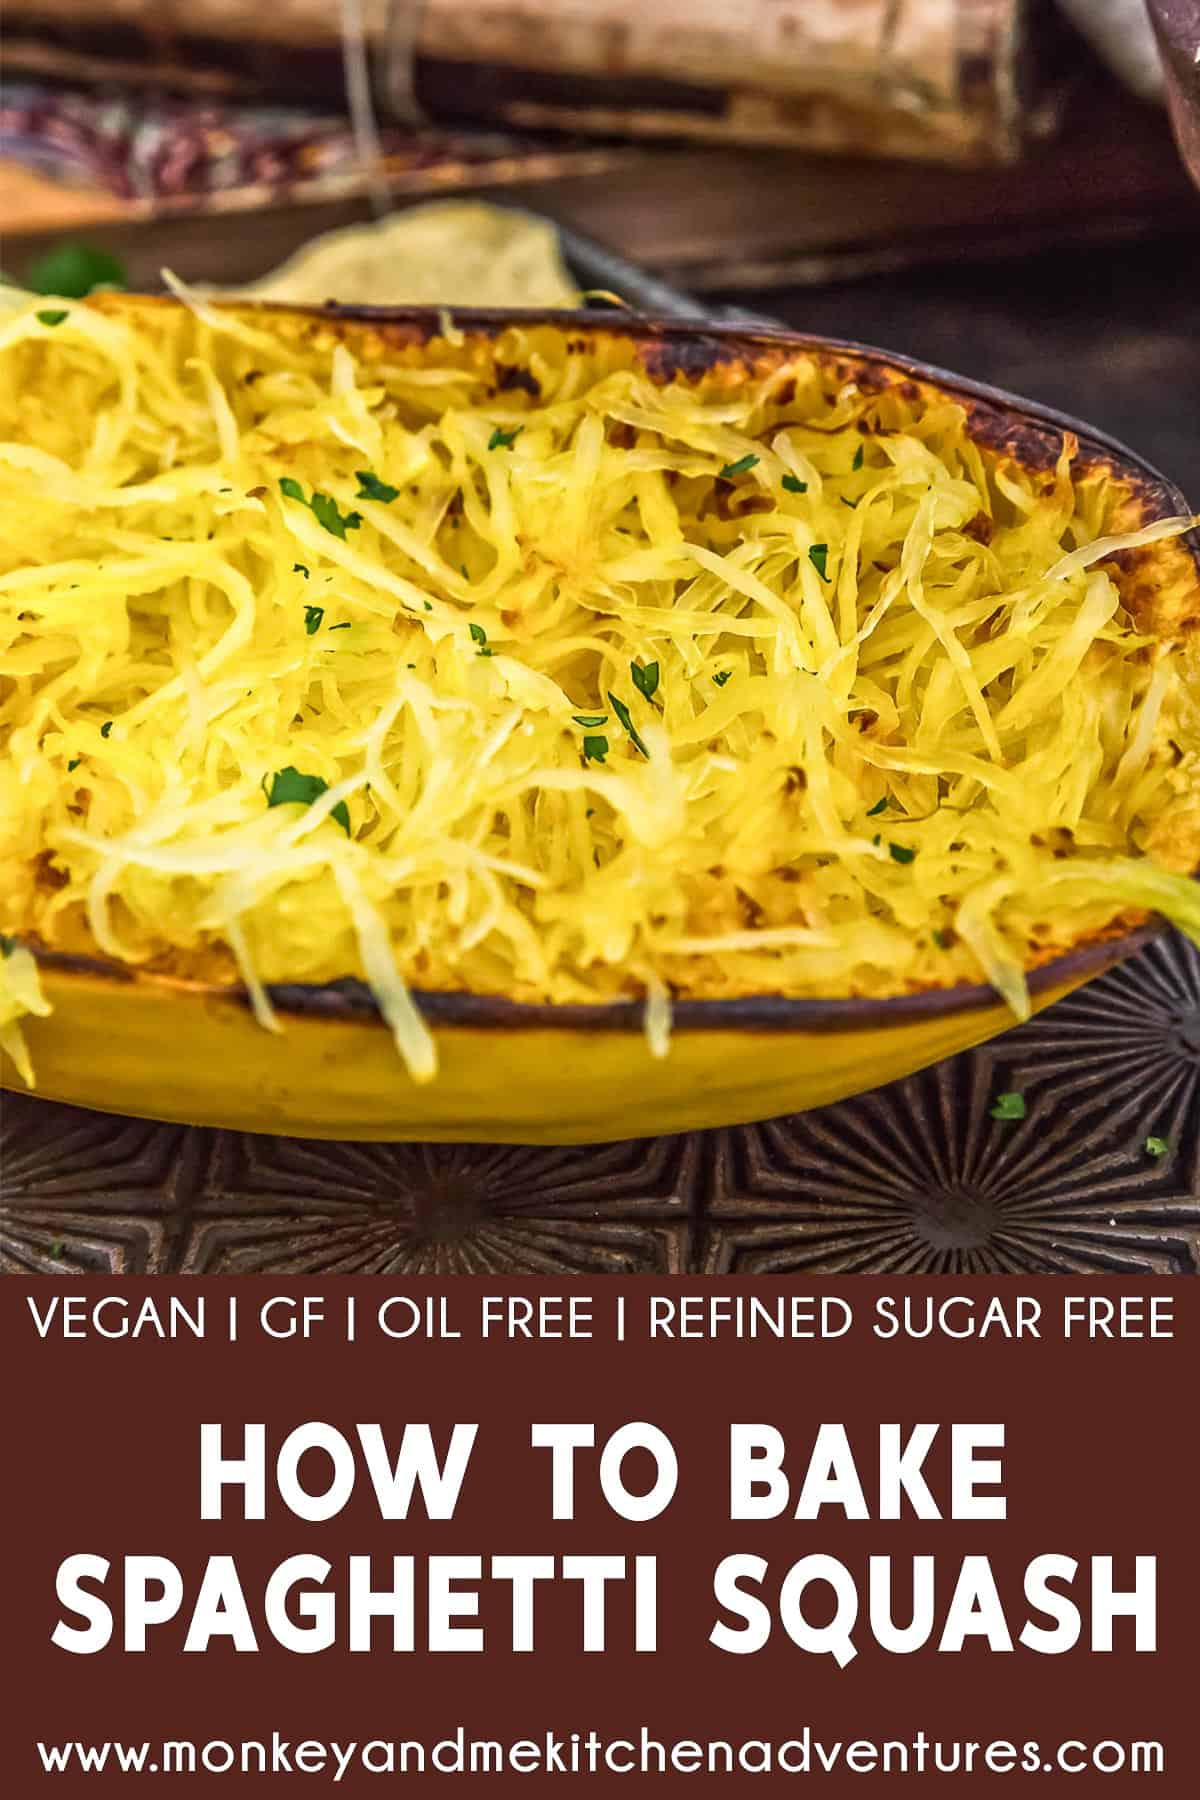 How to Bake a Spaghetti Squash with text description